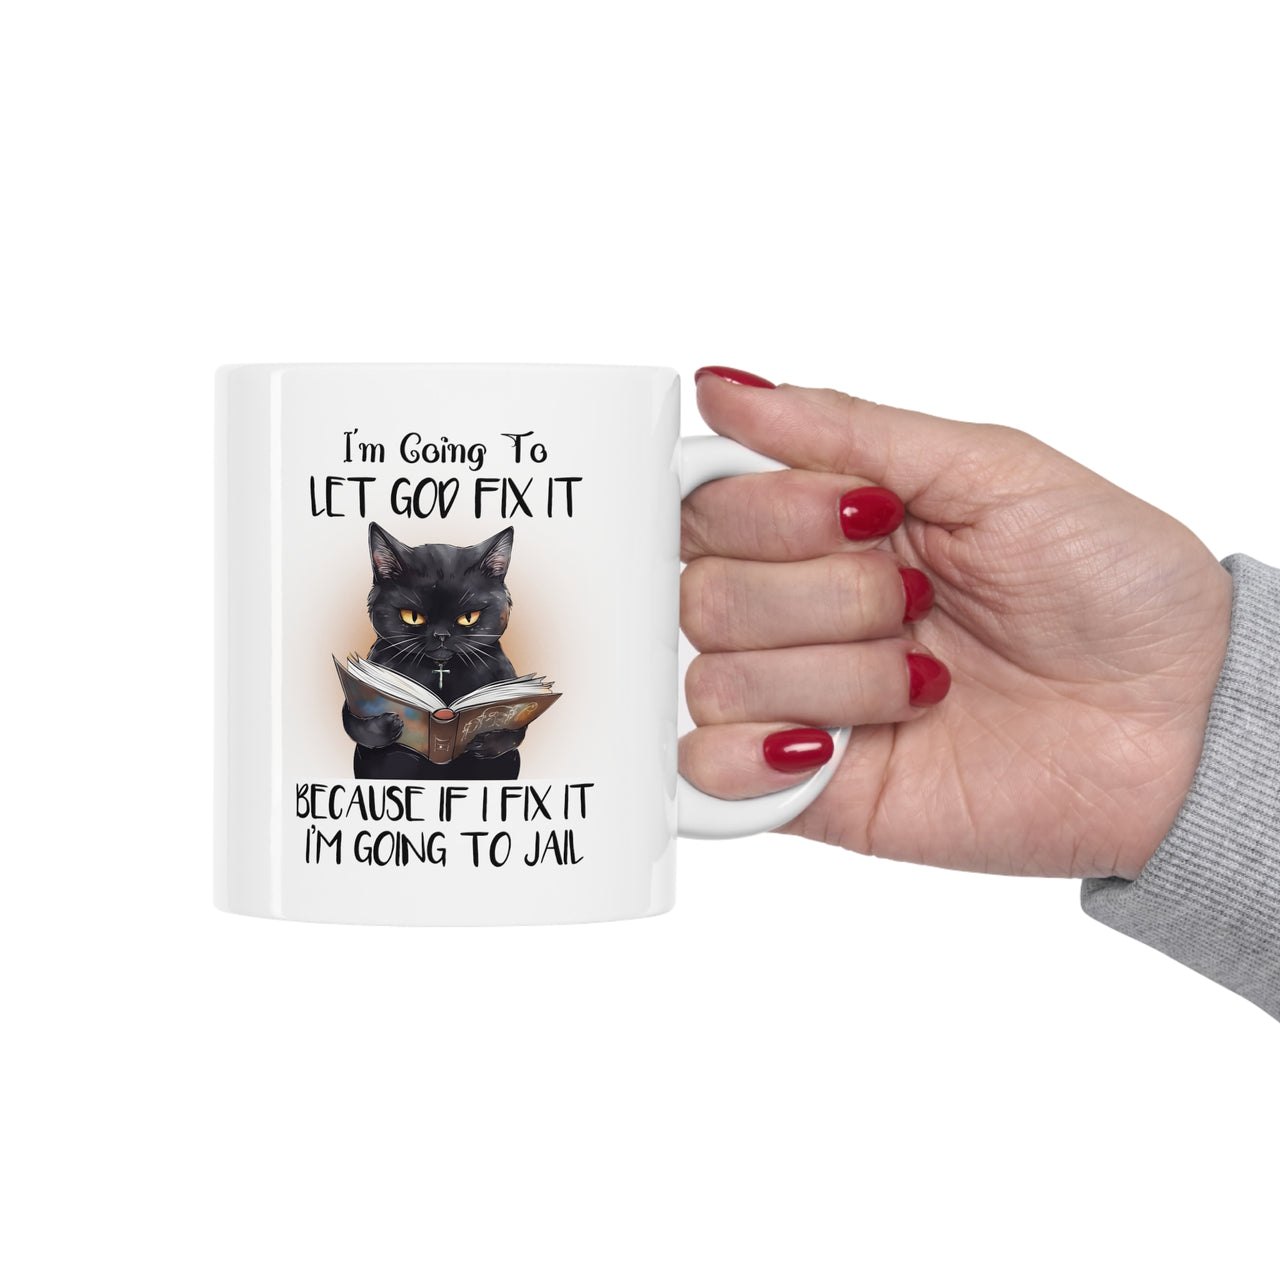 I'm Going To Let God Fix It Because If I Fix It I'm Going To Jail 🐕 🐾 ☕️ Mug